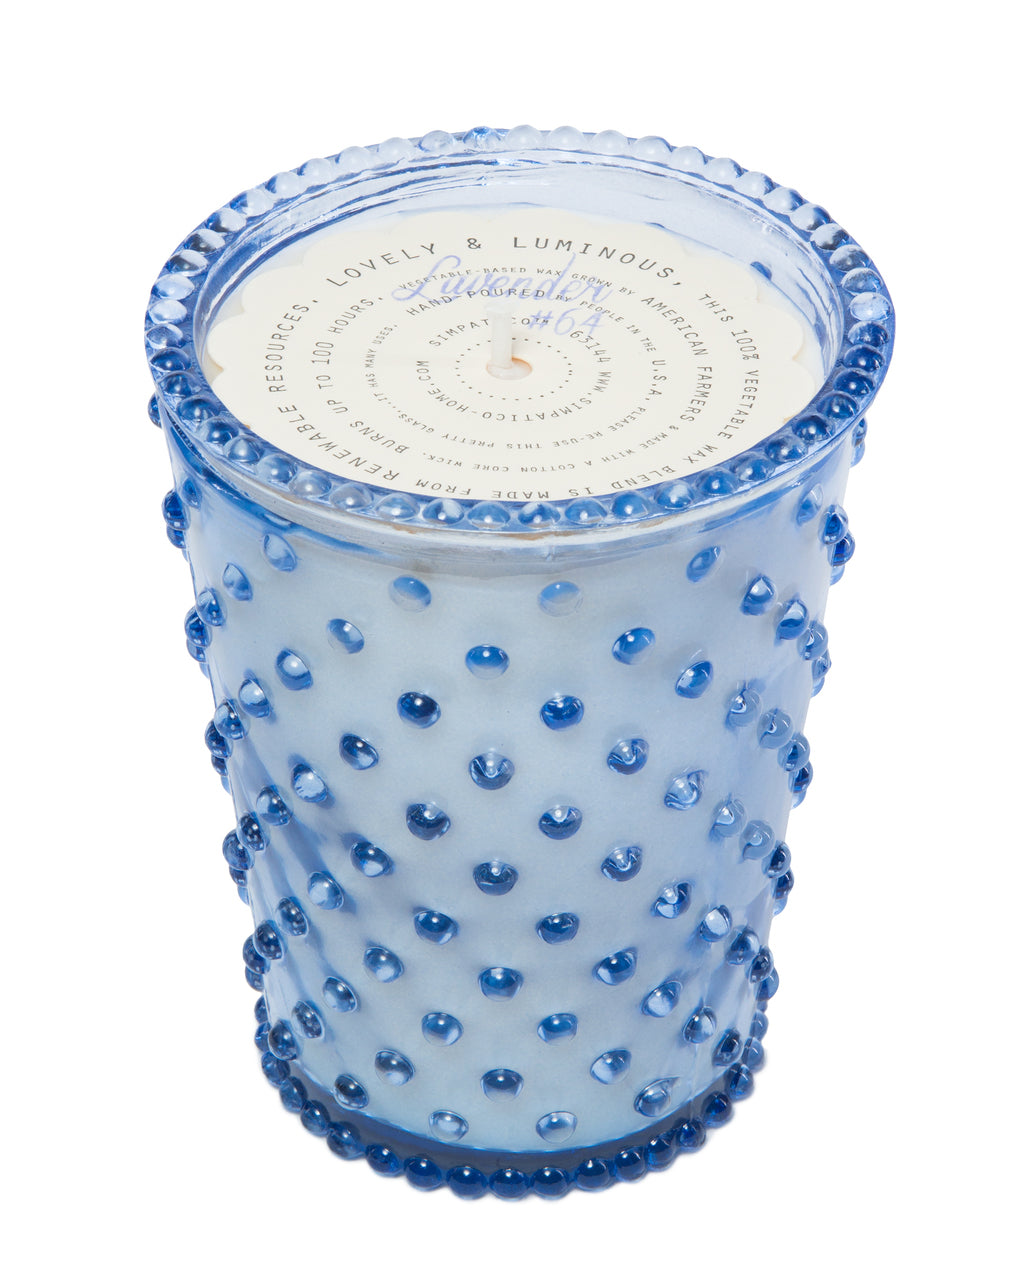 A Simpatico NO. 64 Lavender Hobnail Glass Candle holder embellished with darker blue dots and a decorative lid featuring elegant script writing, ideal for Simpatico NO. 64 Lavender Hobnail candles.